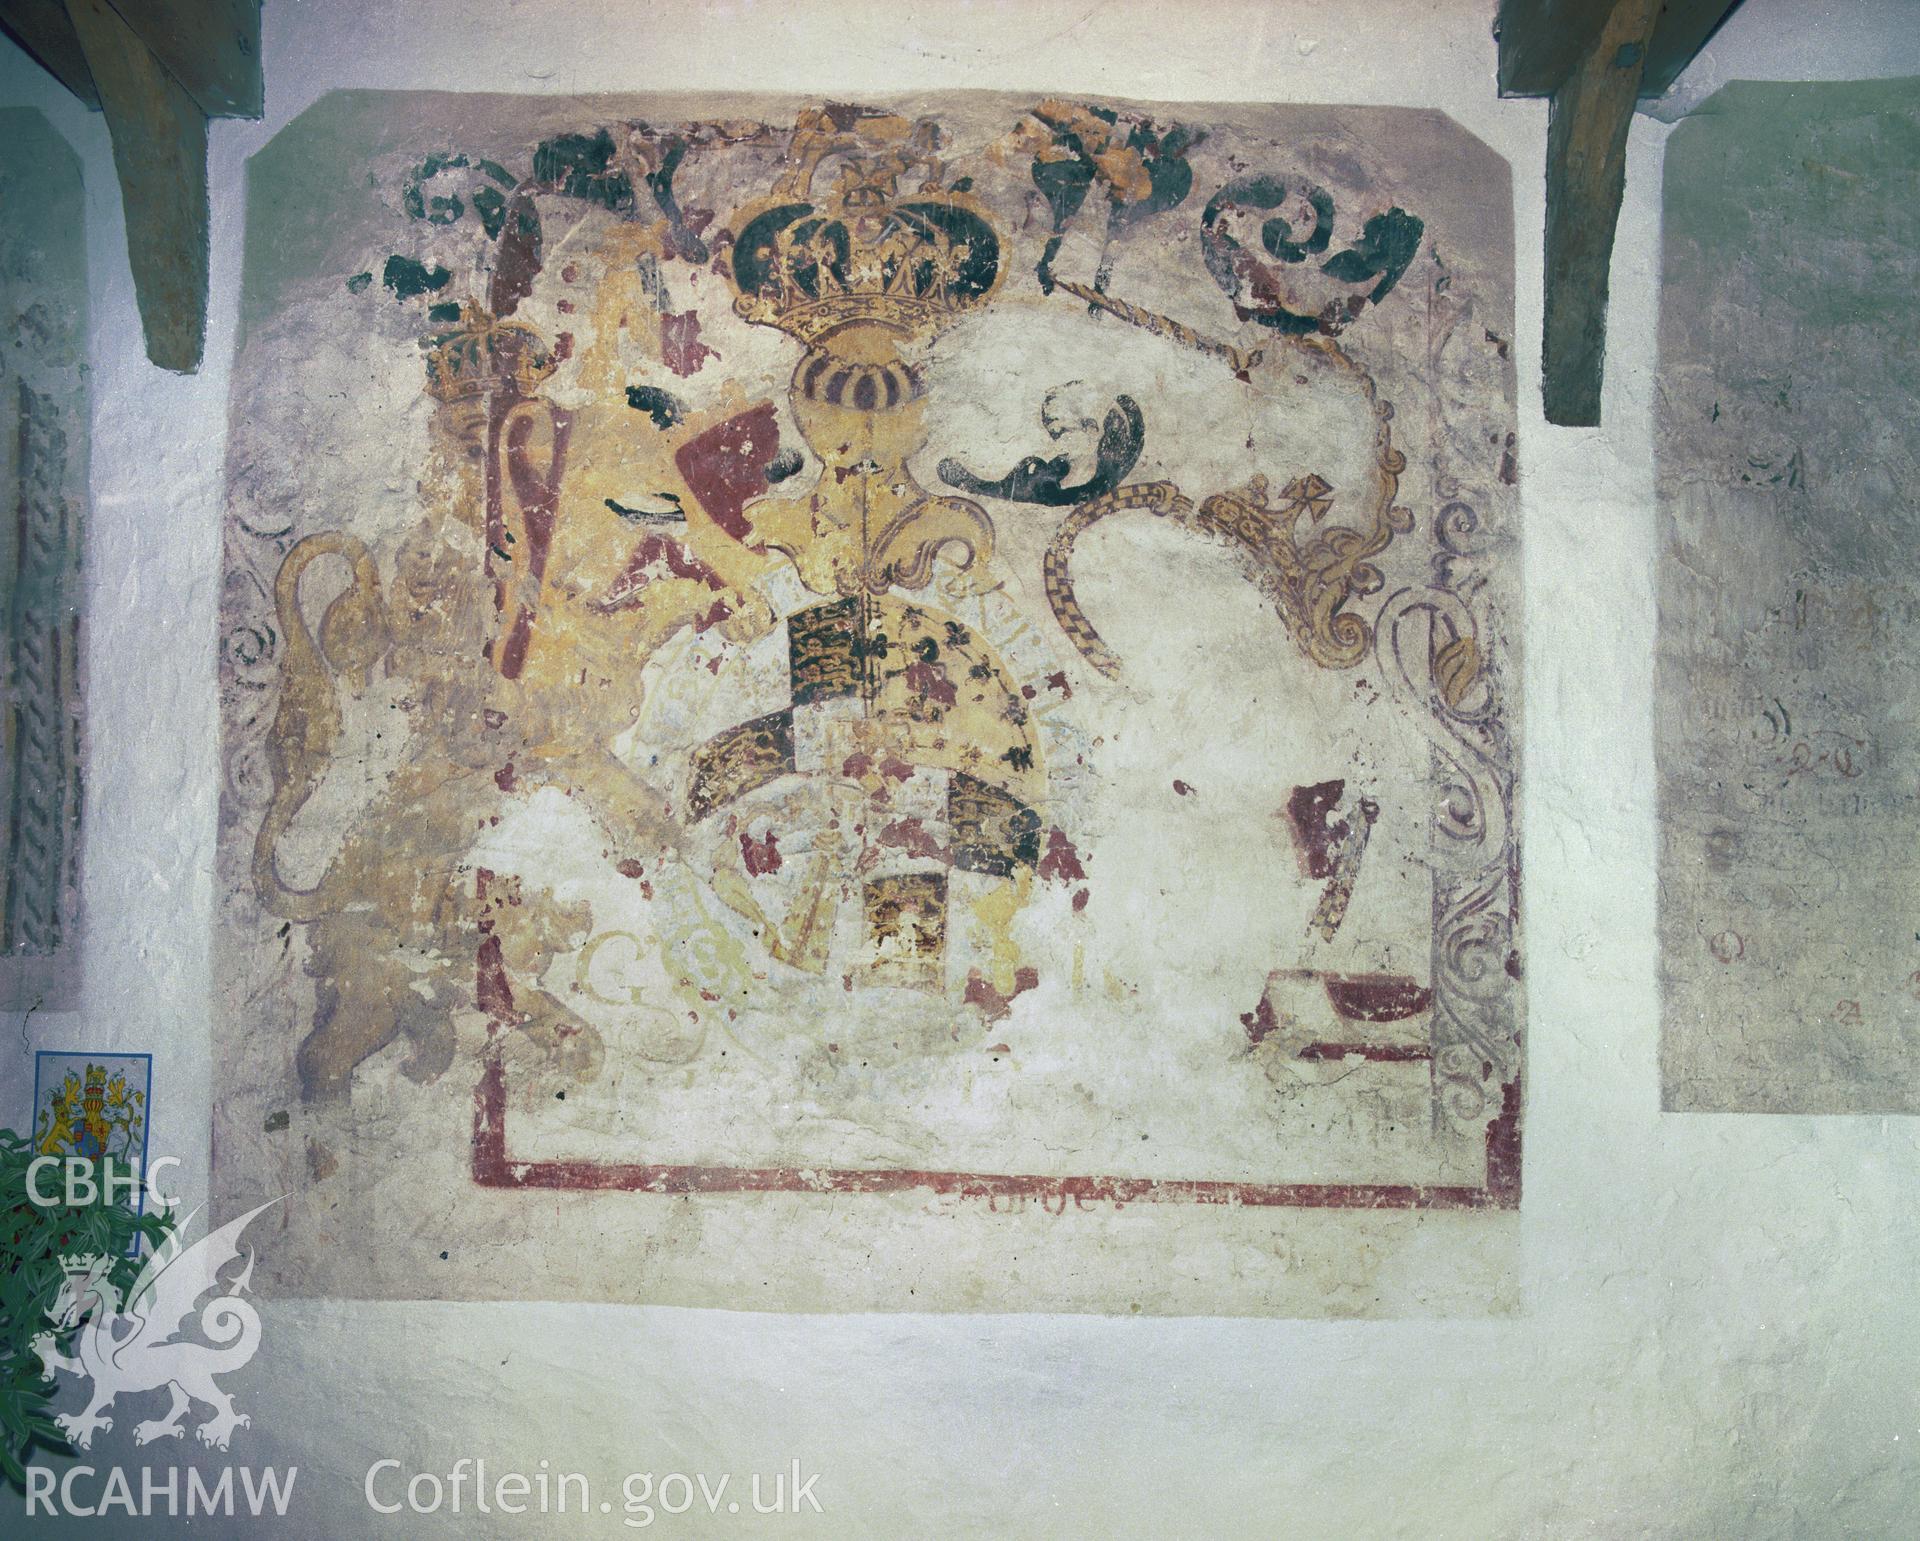 RCAHMW colour negative of colour transparency (reference number 862082), showing wallpainting at Eglwys Brewis Church.